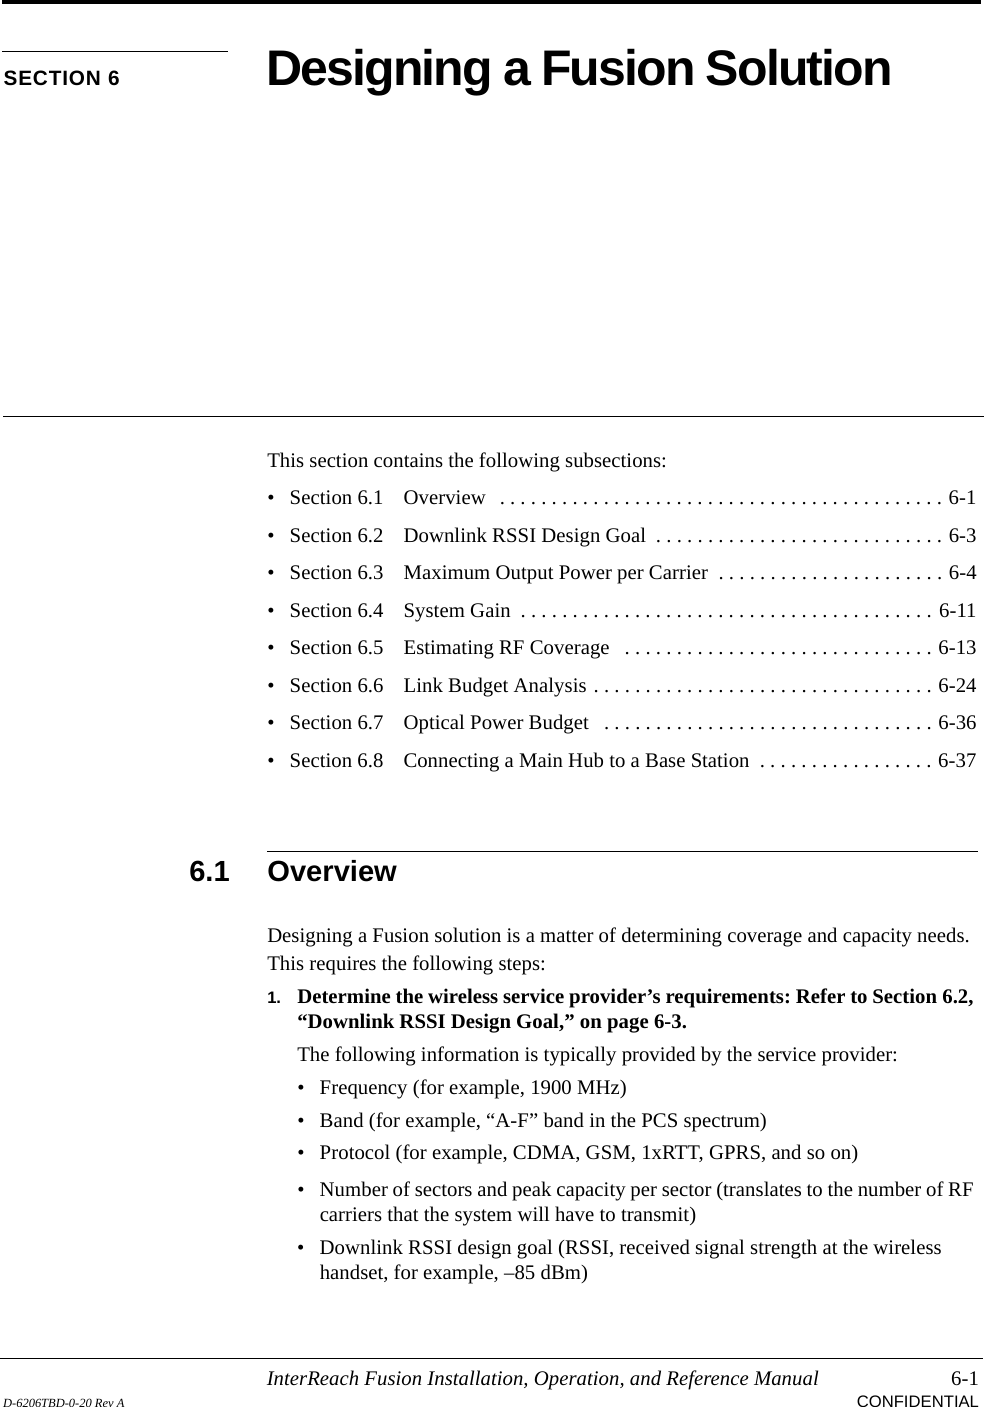 InterReach Fusion Installation, Operation, and Reference Manual 6-1D-6206TBD-0-20 Rev A CONFIDENTIALSECTION 6 Designing a Fusion SolutionThis section contains the following subsections:• Section 6.1   Overview   . . . . . . . . . . . . . . . . . . . . . . . . . . . . . . . . . . . . . . . . . . . 6-1• Section 6.2   Downlink RSSI Design Goal  . . . . . . . . . . . . . . . . . . . . . . . . . . . . 6-3• Section 6.3   Maximum Output Power per Carrier  . . . . . . . . . . . . . . . . . . . . . . 6-4• Section 6.4   System Gain  . . . . . . . . . . . . . . . . . . . . . . . . . . . . . . . . . . . . . . . . 6-11• Section 6.5   Estimating RF Coverage   . . . . . . . . . . . . . . . . . . . . . . . . . . . . . . 6-13• Section 6.6   Link Budget Analysis . . . . . . . . . . . . . . . . . . . . . . . . . . . . . . . . . 6-24• Section 6.7   Optical Power Budget   . . . . . . . . . . . . . . . . . . . . . . . . . . . . . . . . 6-36• Section 6.8   Connecting a Main Hub to a Base Station  . . . . . . . . . . . . . . . . . 6-376.1 OverviewDesigning a Fusion solution is a matter of determining coverage and capacity needs. This requires the following steps:1. Determine the wireless service provider’s requirements: Refer to Section 6.2, “Downlink RSSI Design Goal,” on page 6-3.The following information is typically provided by the service provider:• Frequency (for example, 1900 MHz)• Band (for example, “A-F” band in the PCS spectrum)• Protocol (for example, CDMA, GSM, 1xRTT, GPRS, and so on)• Number of sectors and peak capacity per sector (translates to the number of RF carriers that the system will have to transmit)• Downlink RSSI design goal (RSSI, received signal strength at the wireless handset, for example, –85 dBm)